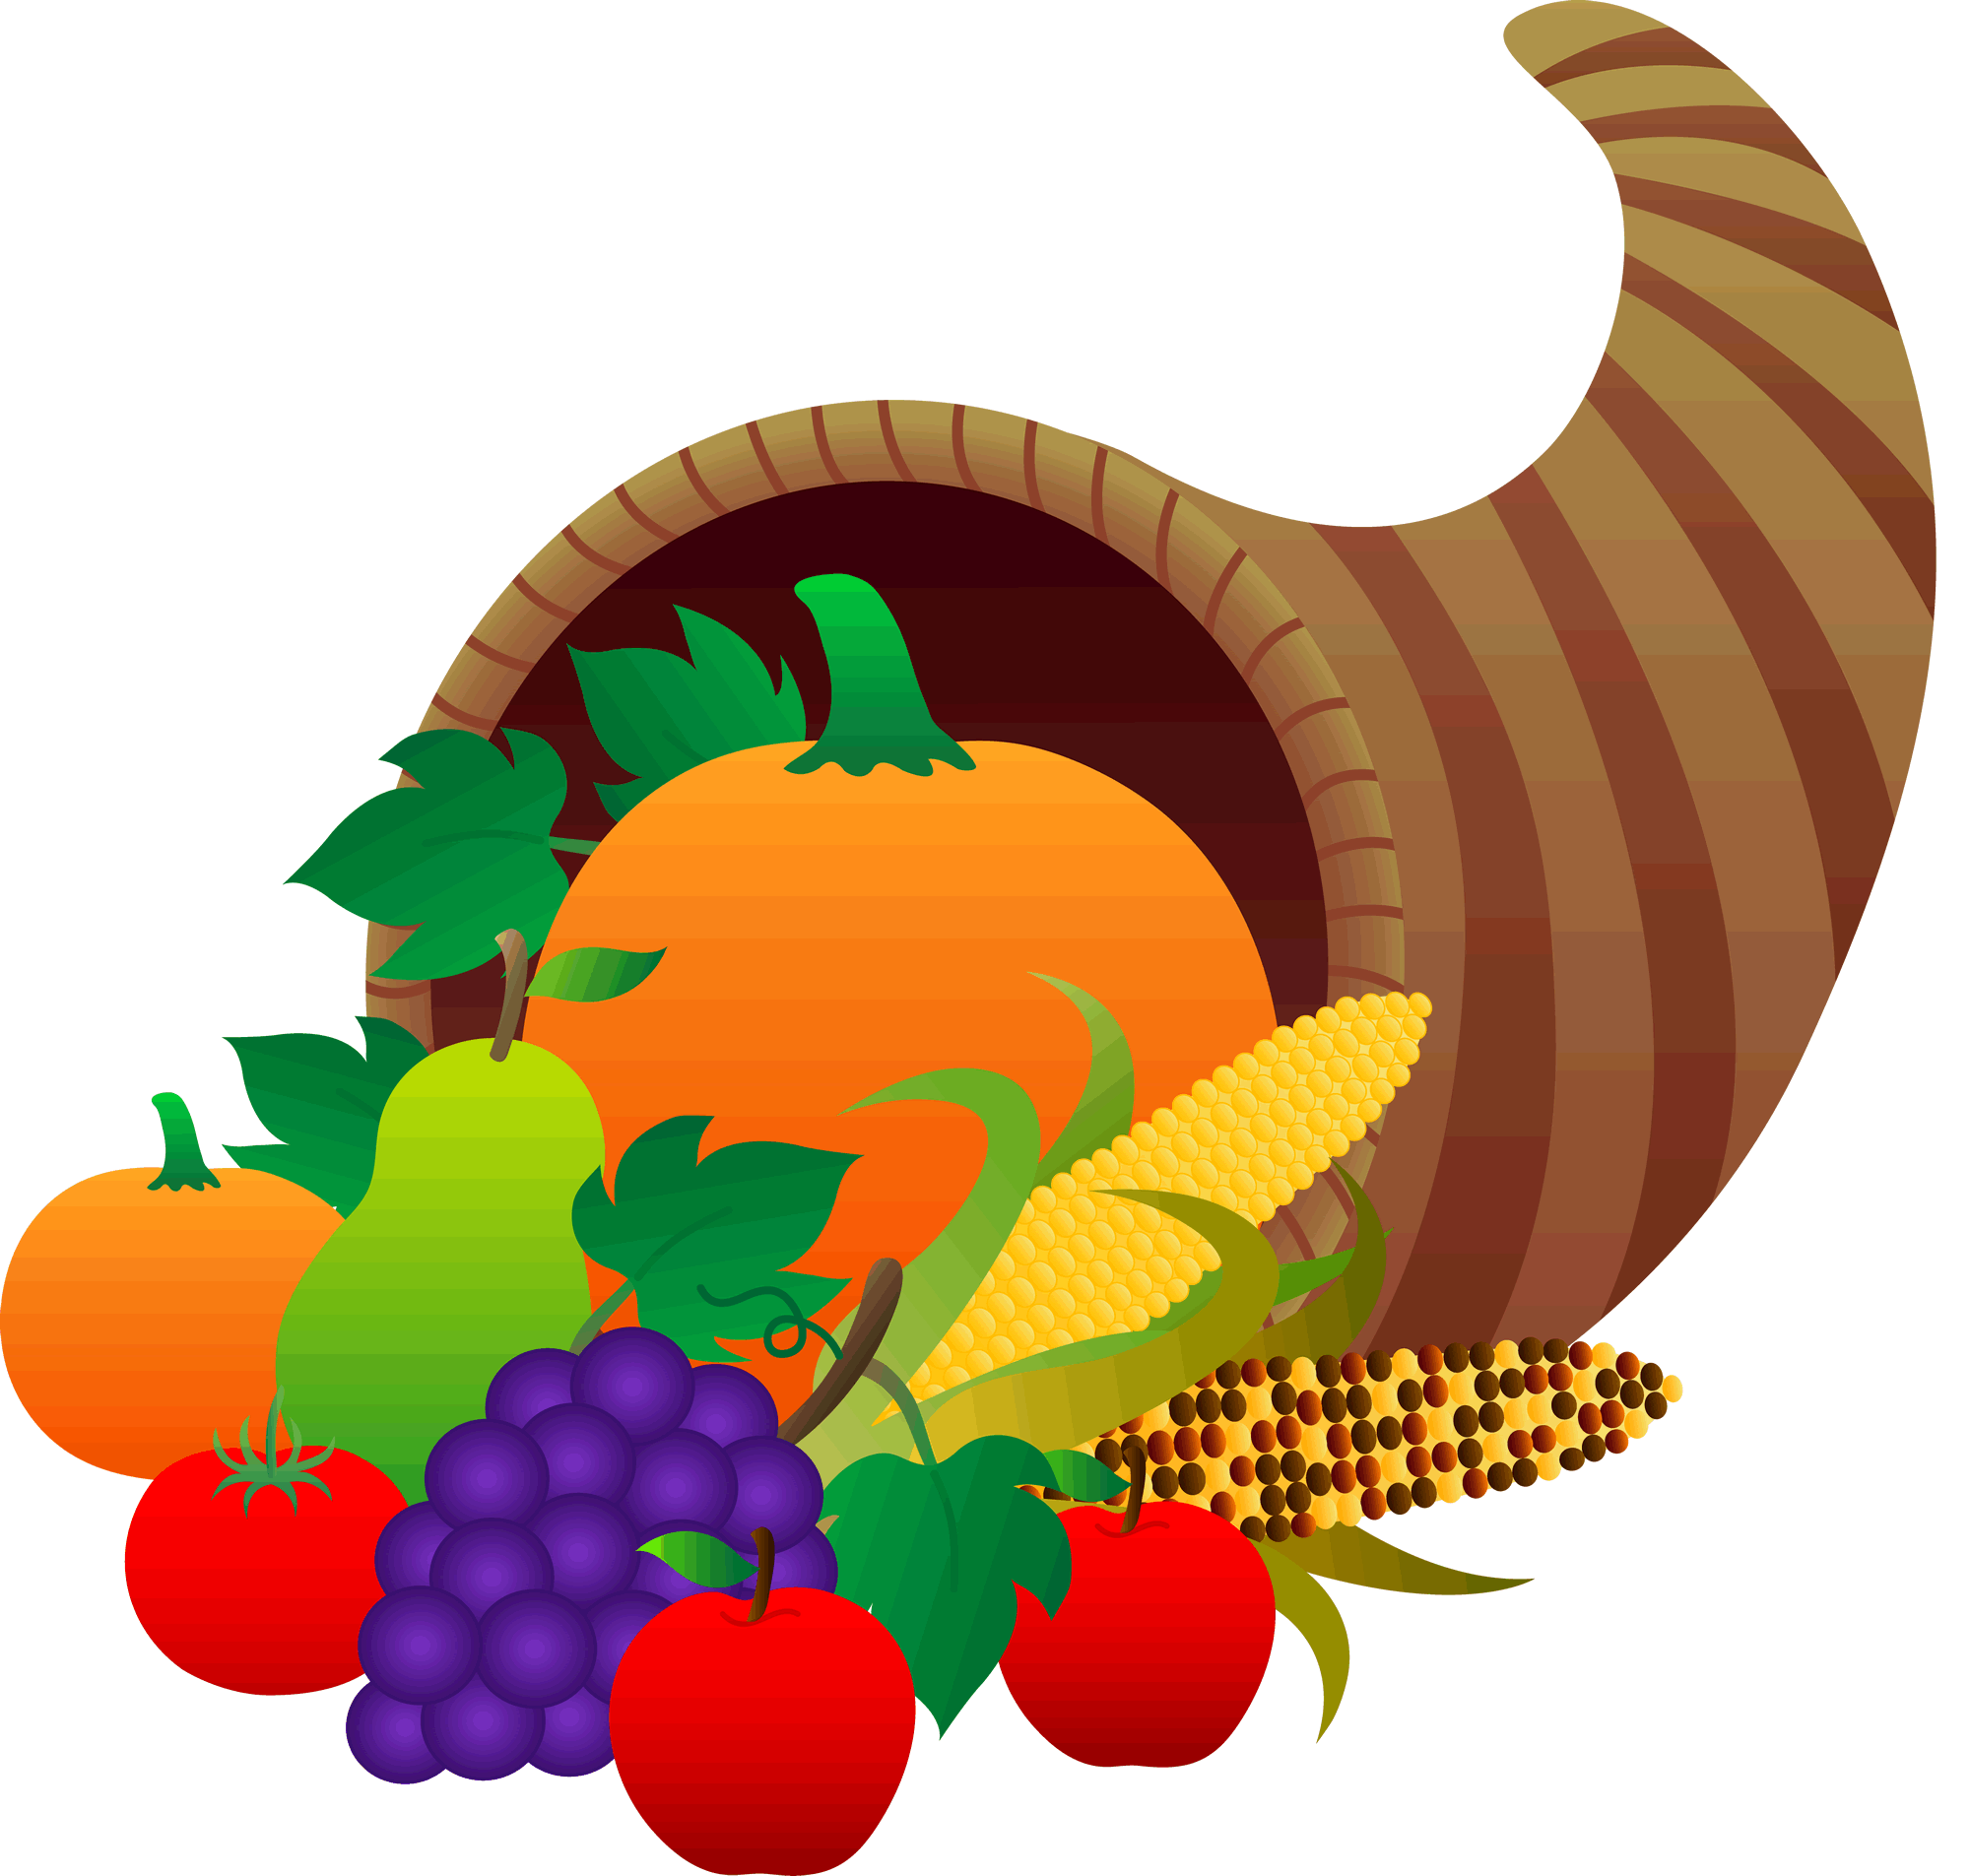 Happy thanksgiving cornucopia kid. Holidays clipart holiday meal